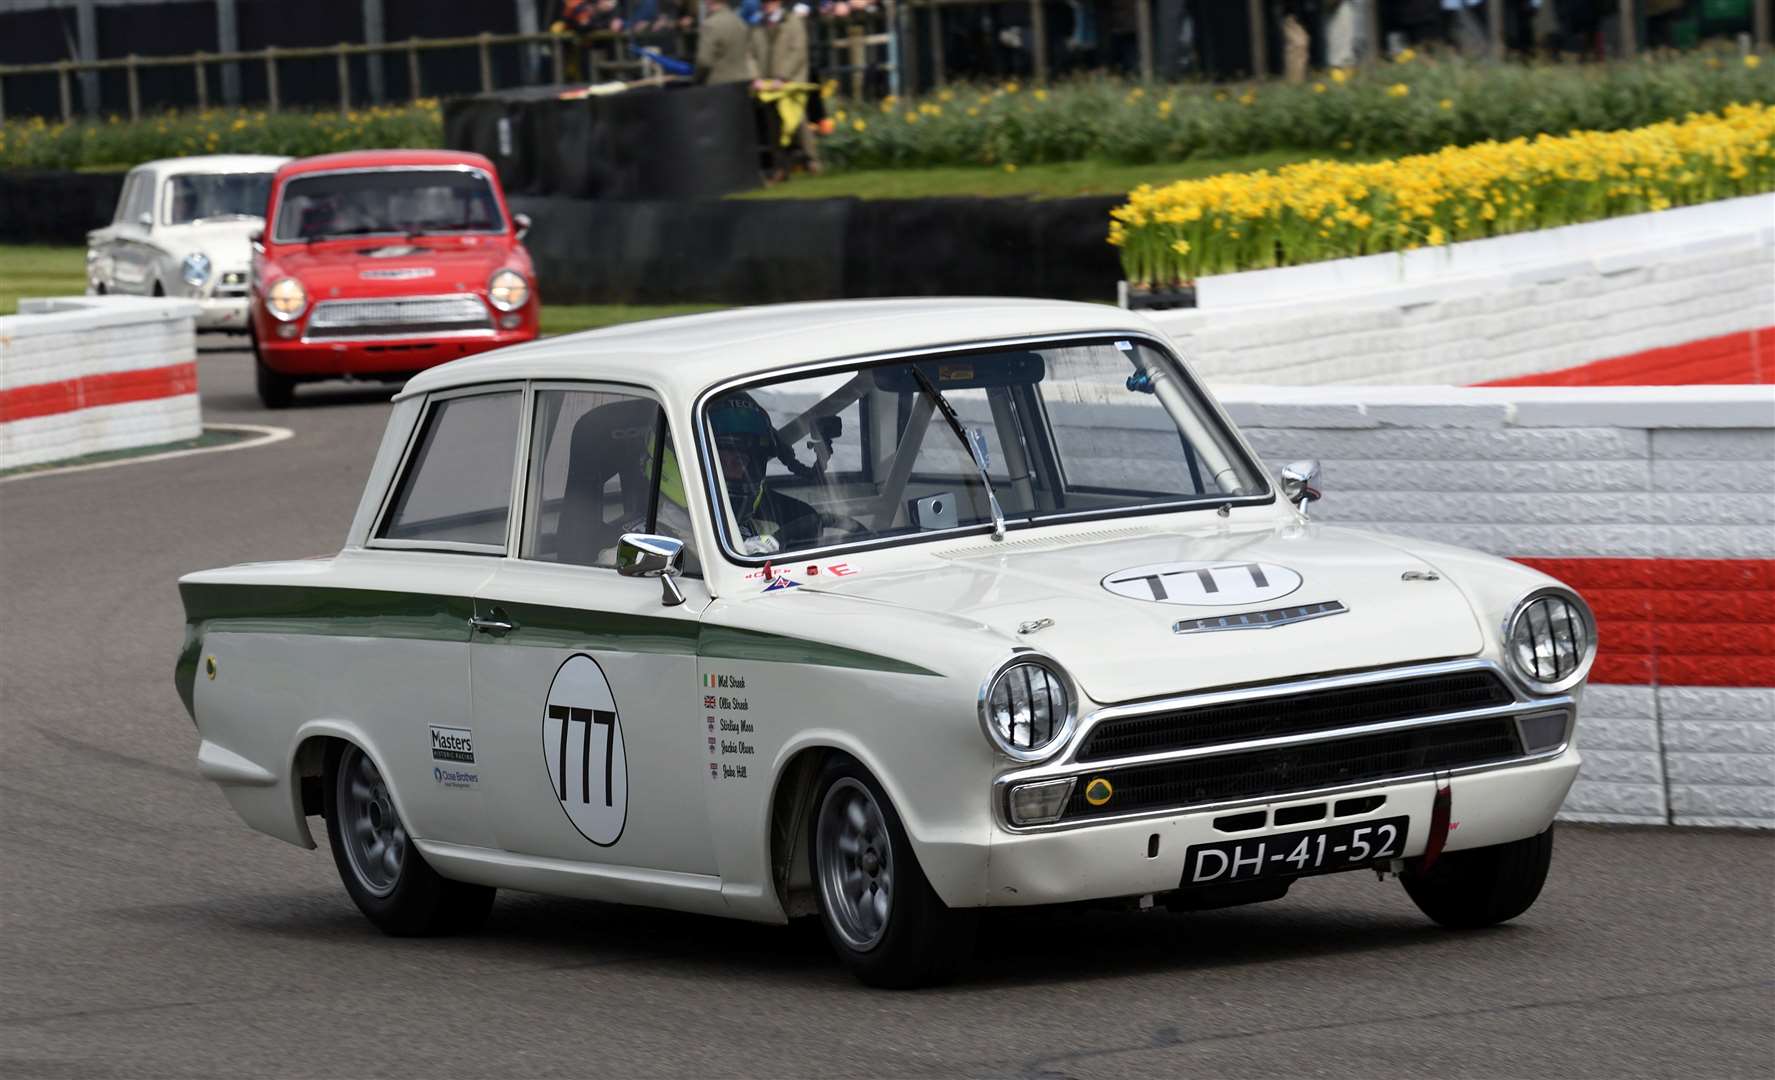 Cranbrook's Ollie Streek, finished eighth in the Jim Clark Trophy race, in his Lotus Cortina, sharing with Jake Hill. Picture: Simon Hildrew